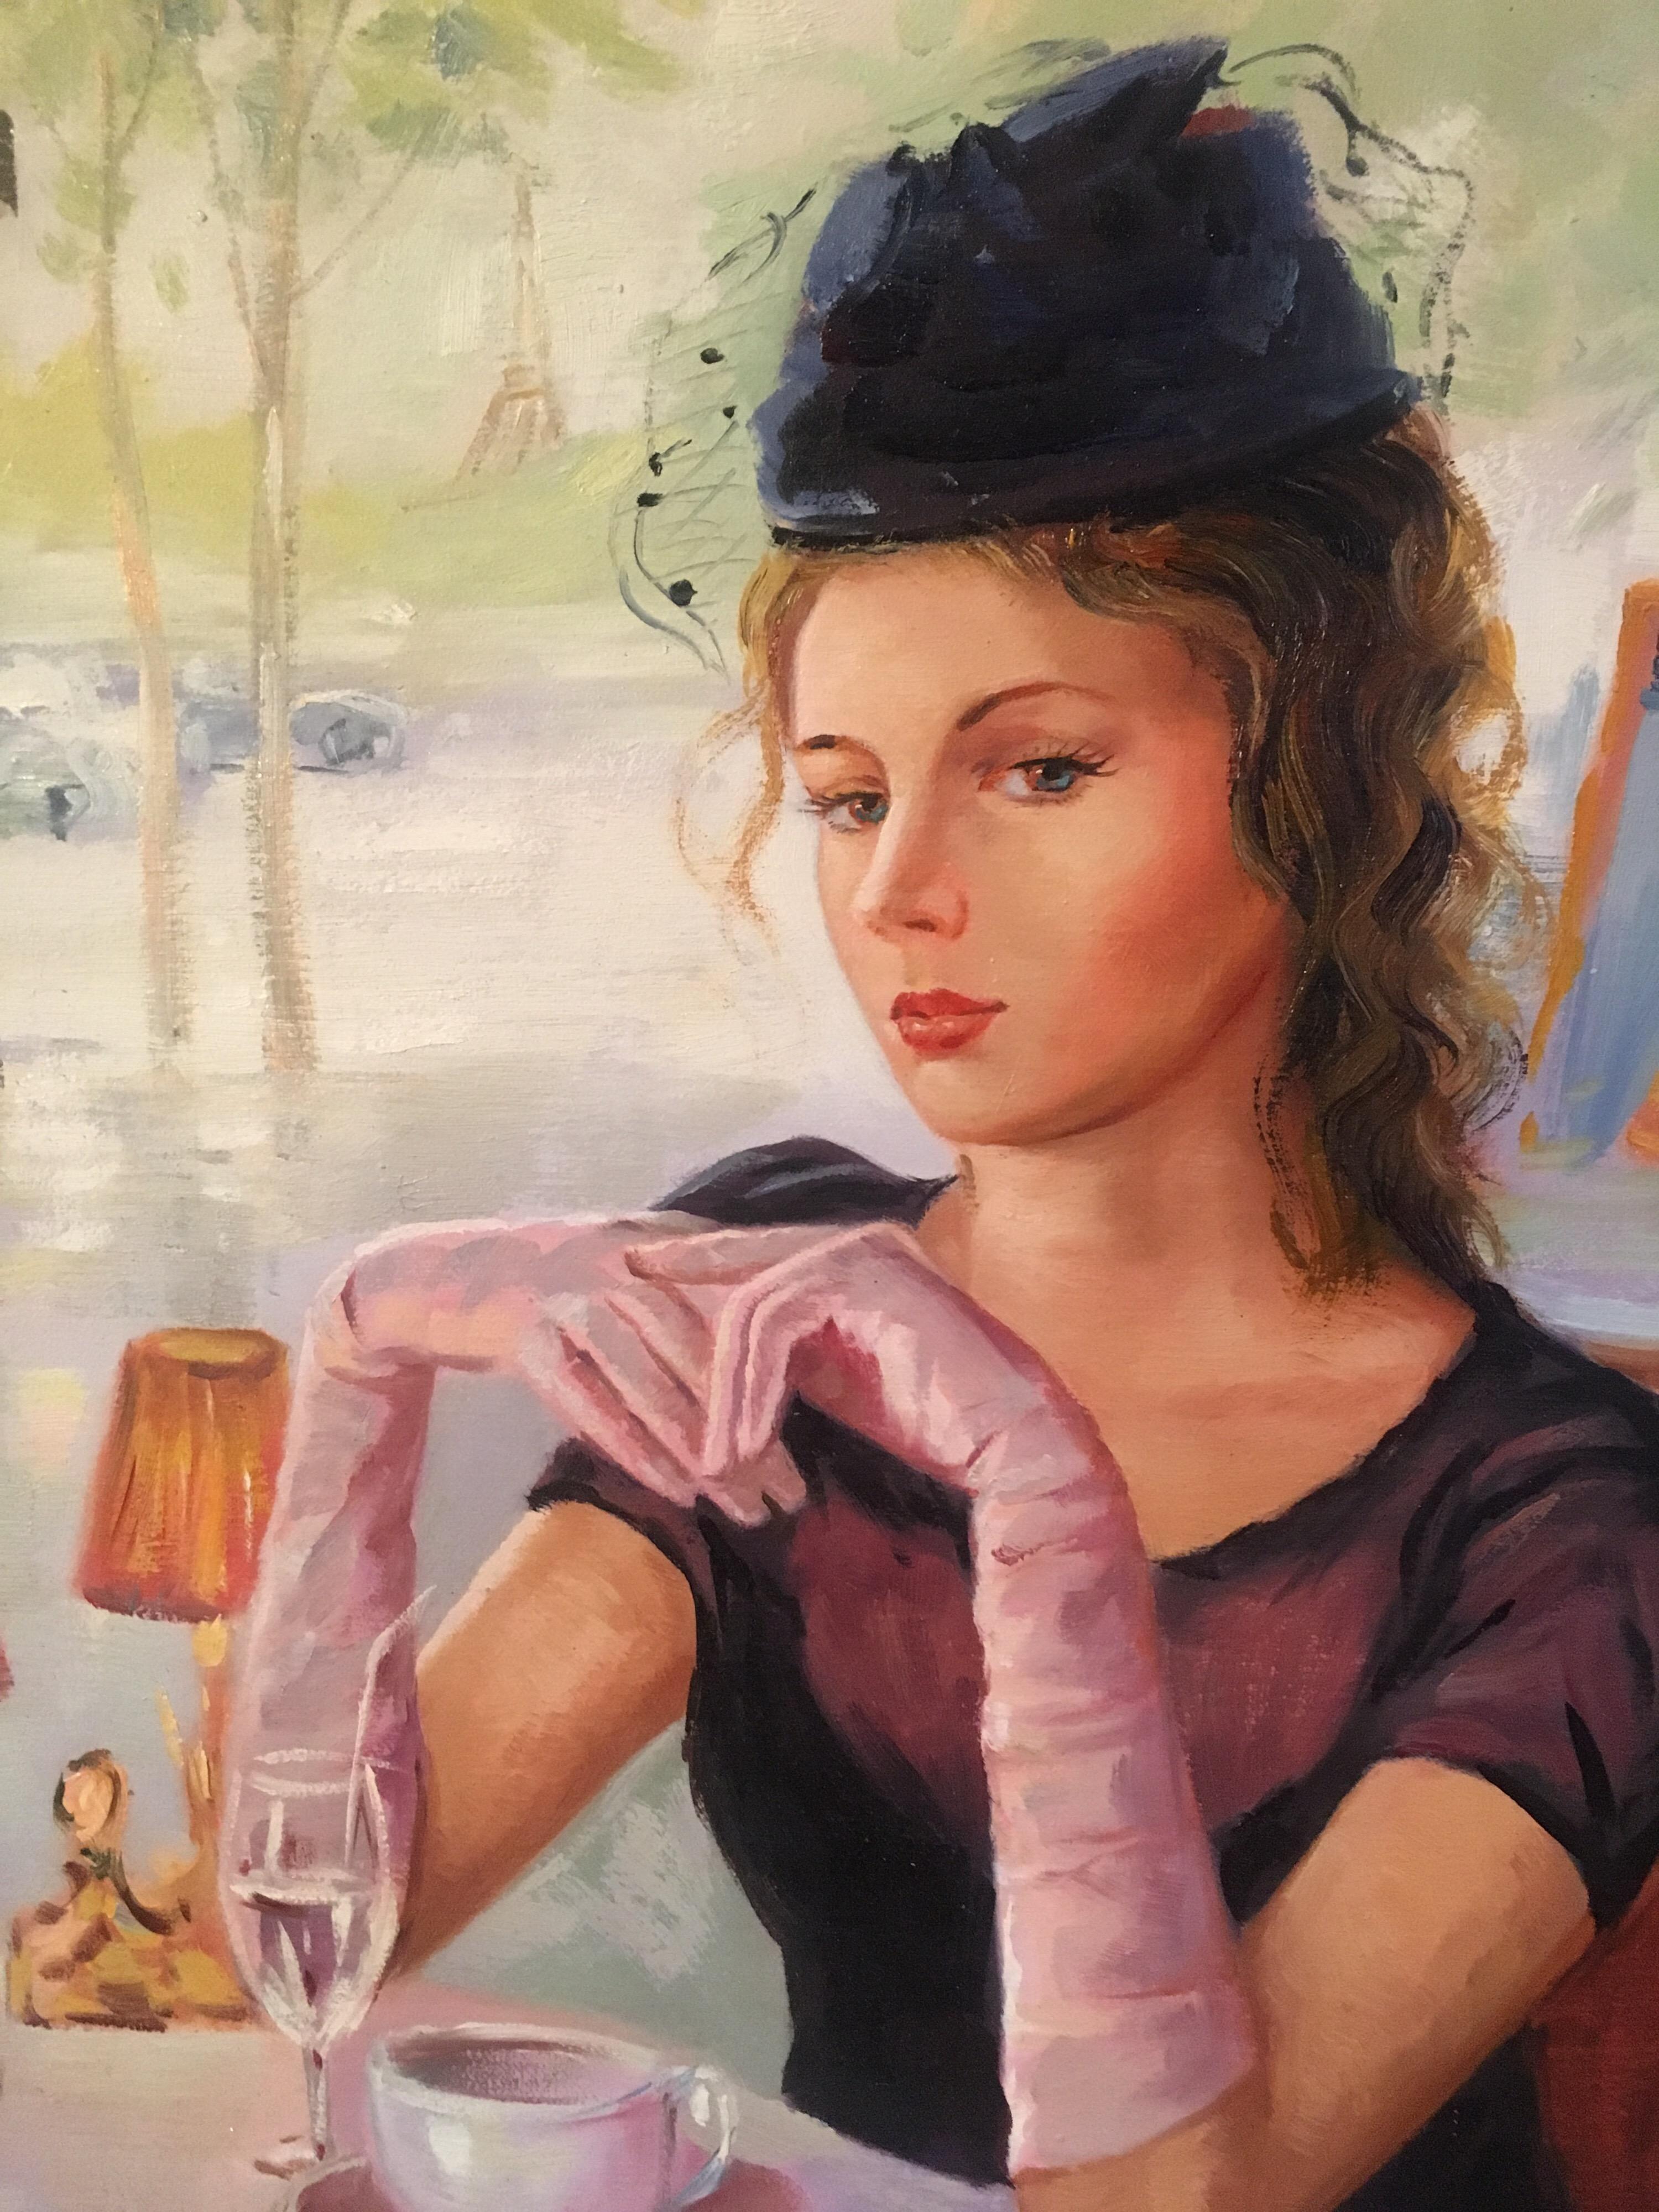 Cafe Society, Impressionist Portrait, Original Oil Painting
French School, late 20th Century
Oil painting on canvas, framed
Frame size: 26 x 22.5 inches

An intriguing oil painting of this girl who looks like she is waiting for someone in a Parisian